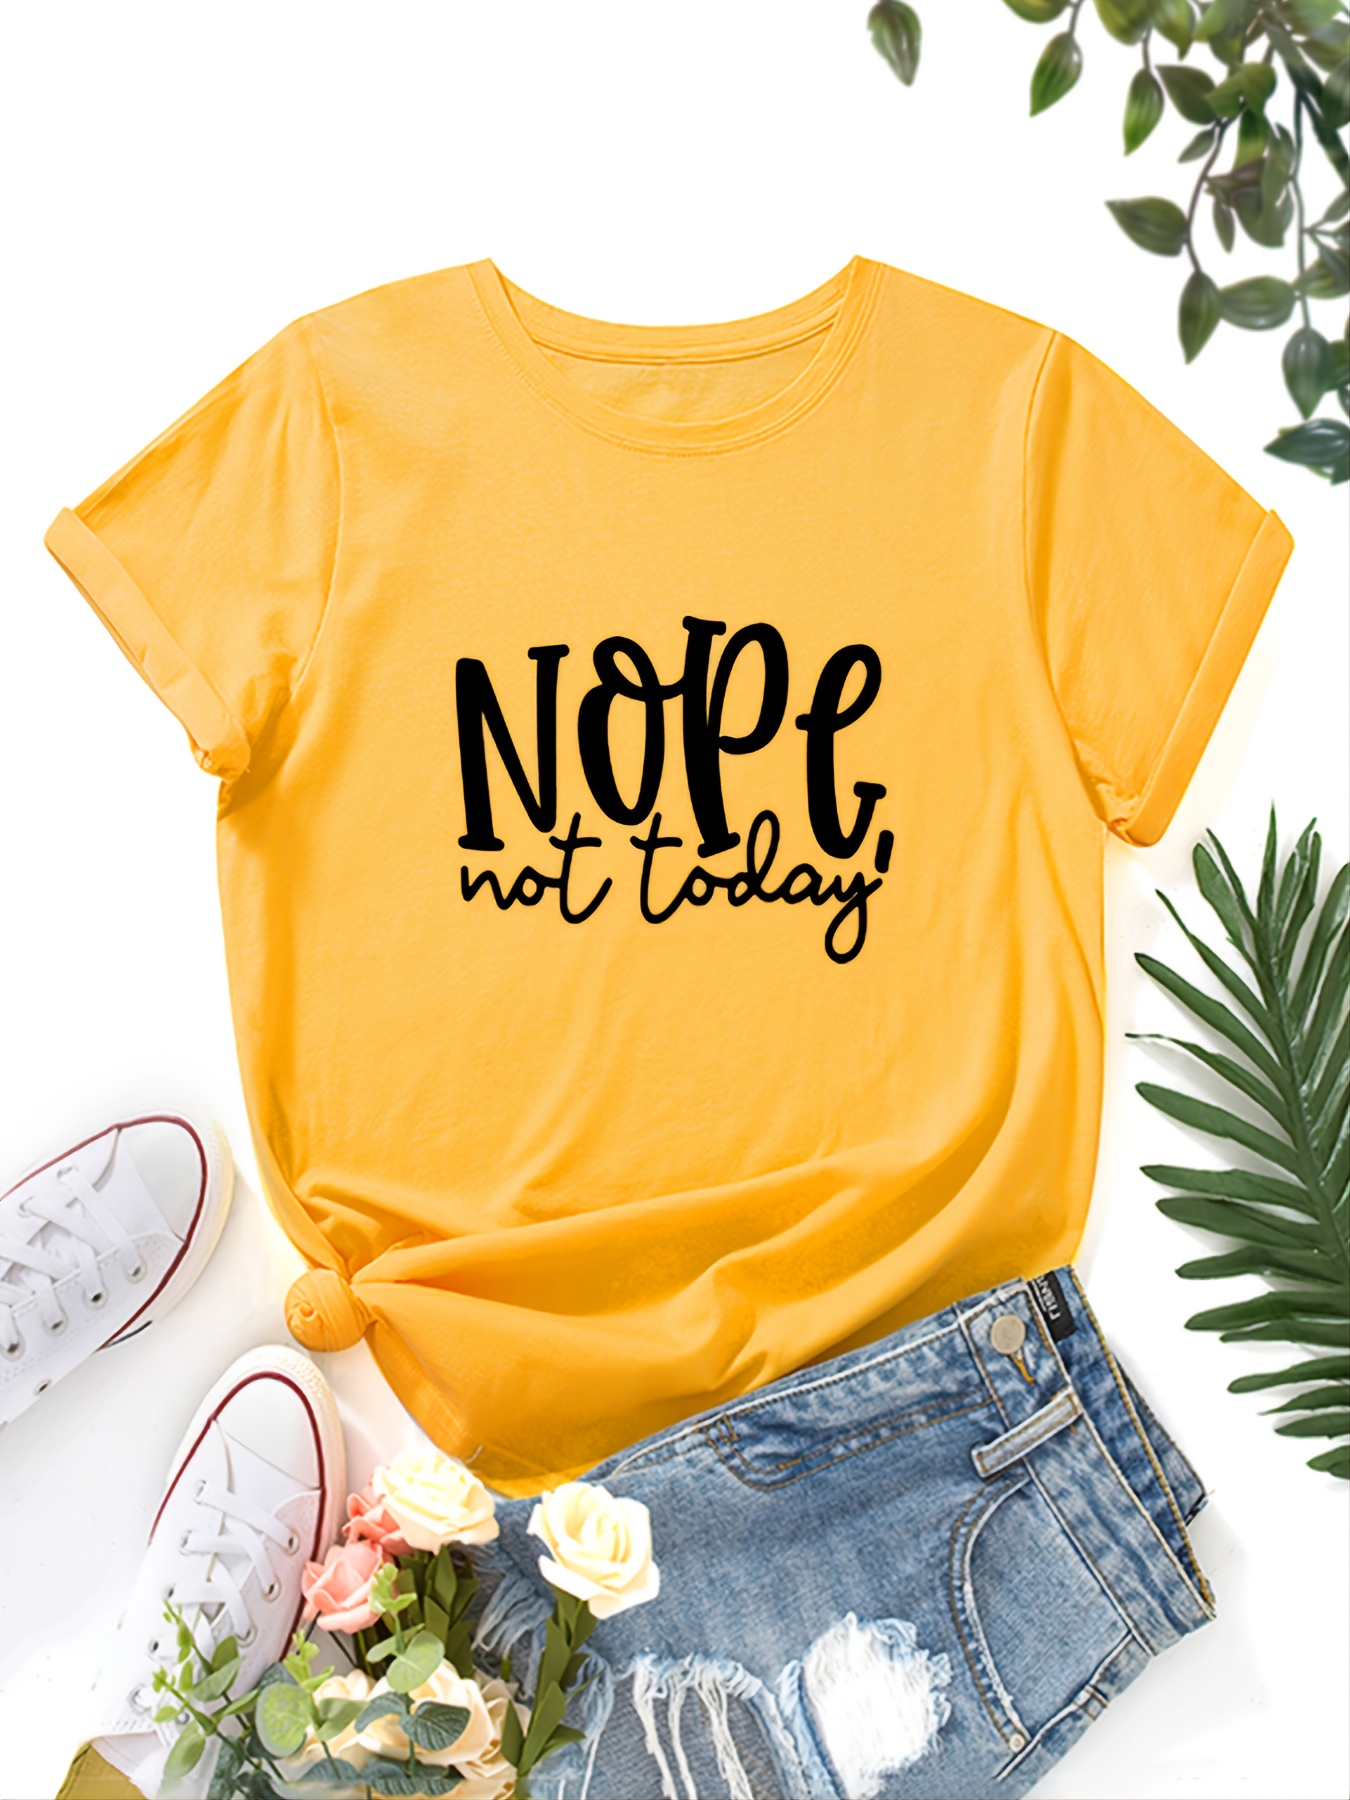 nope. Not Today Letter Print T-shirts, V-neck Sleeve Fashion Top